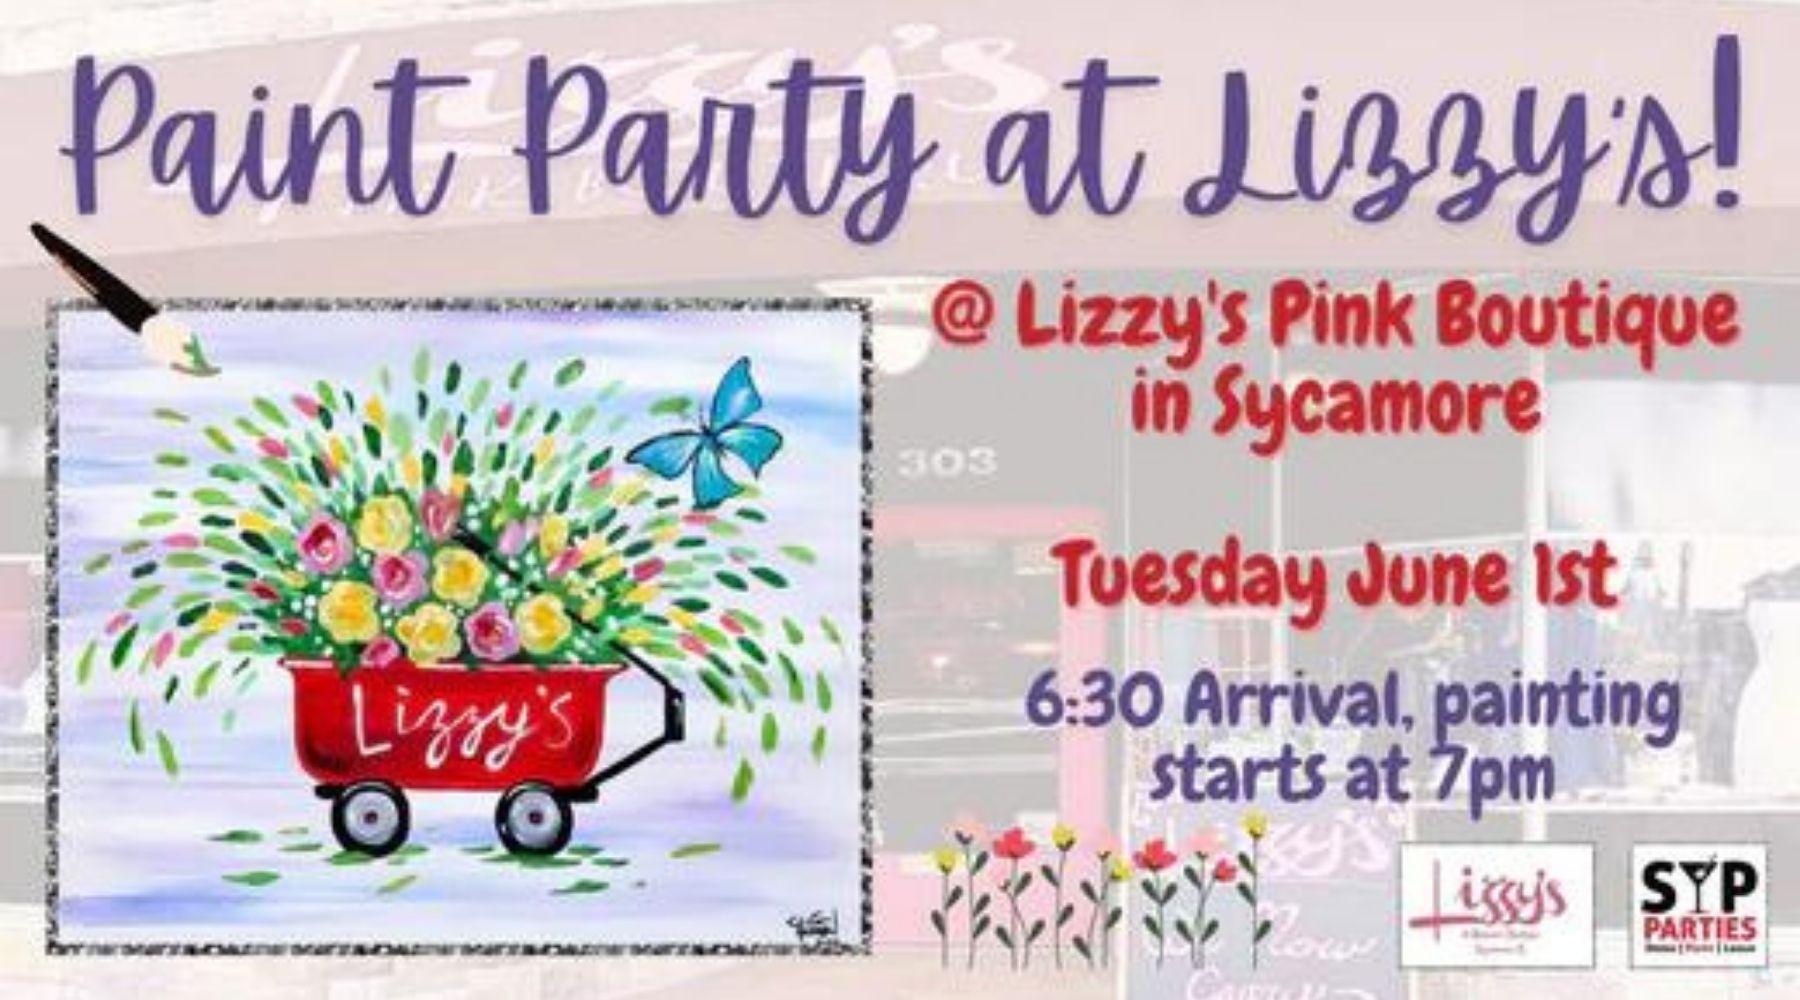 Paint Party at Lizzy's Pink Boutique in Sycamore!